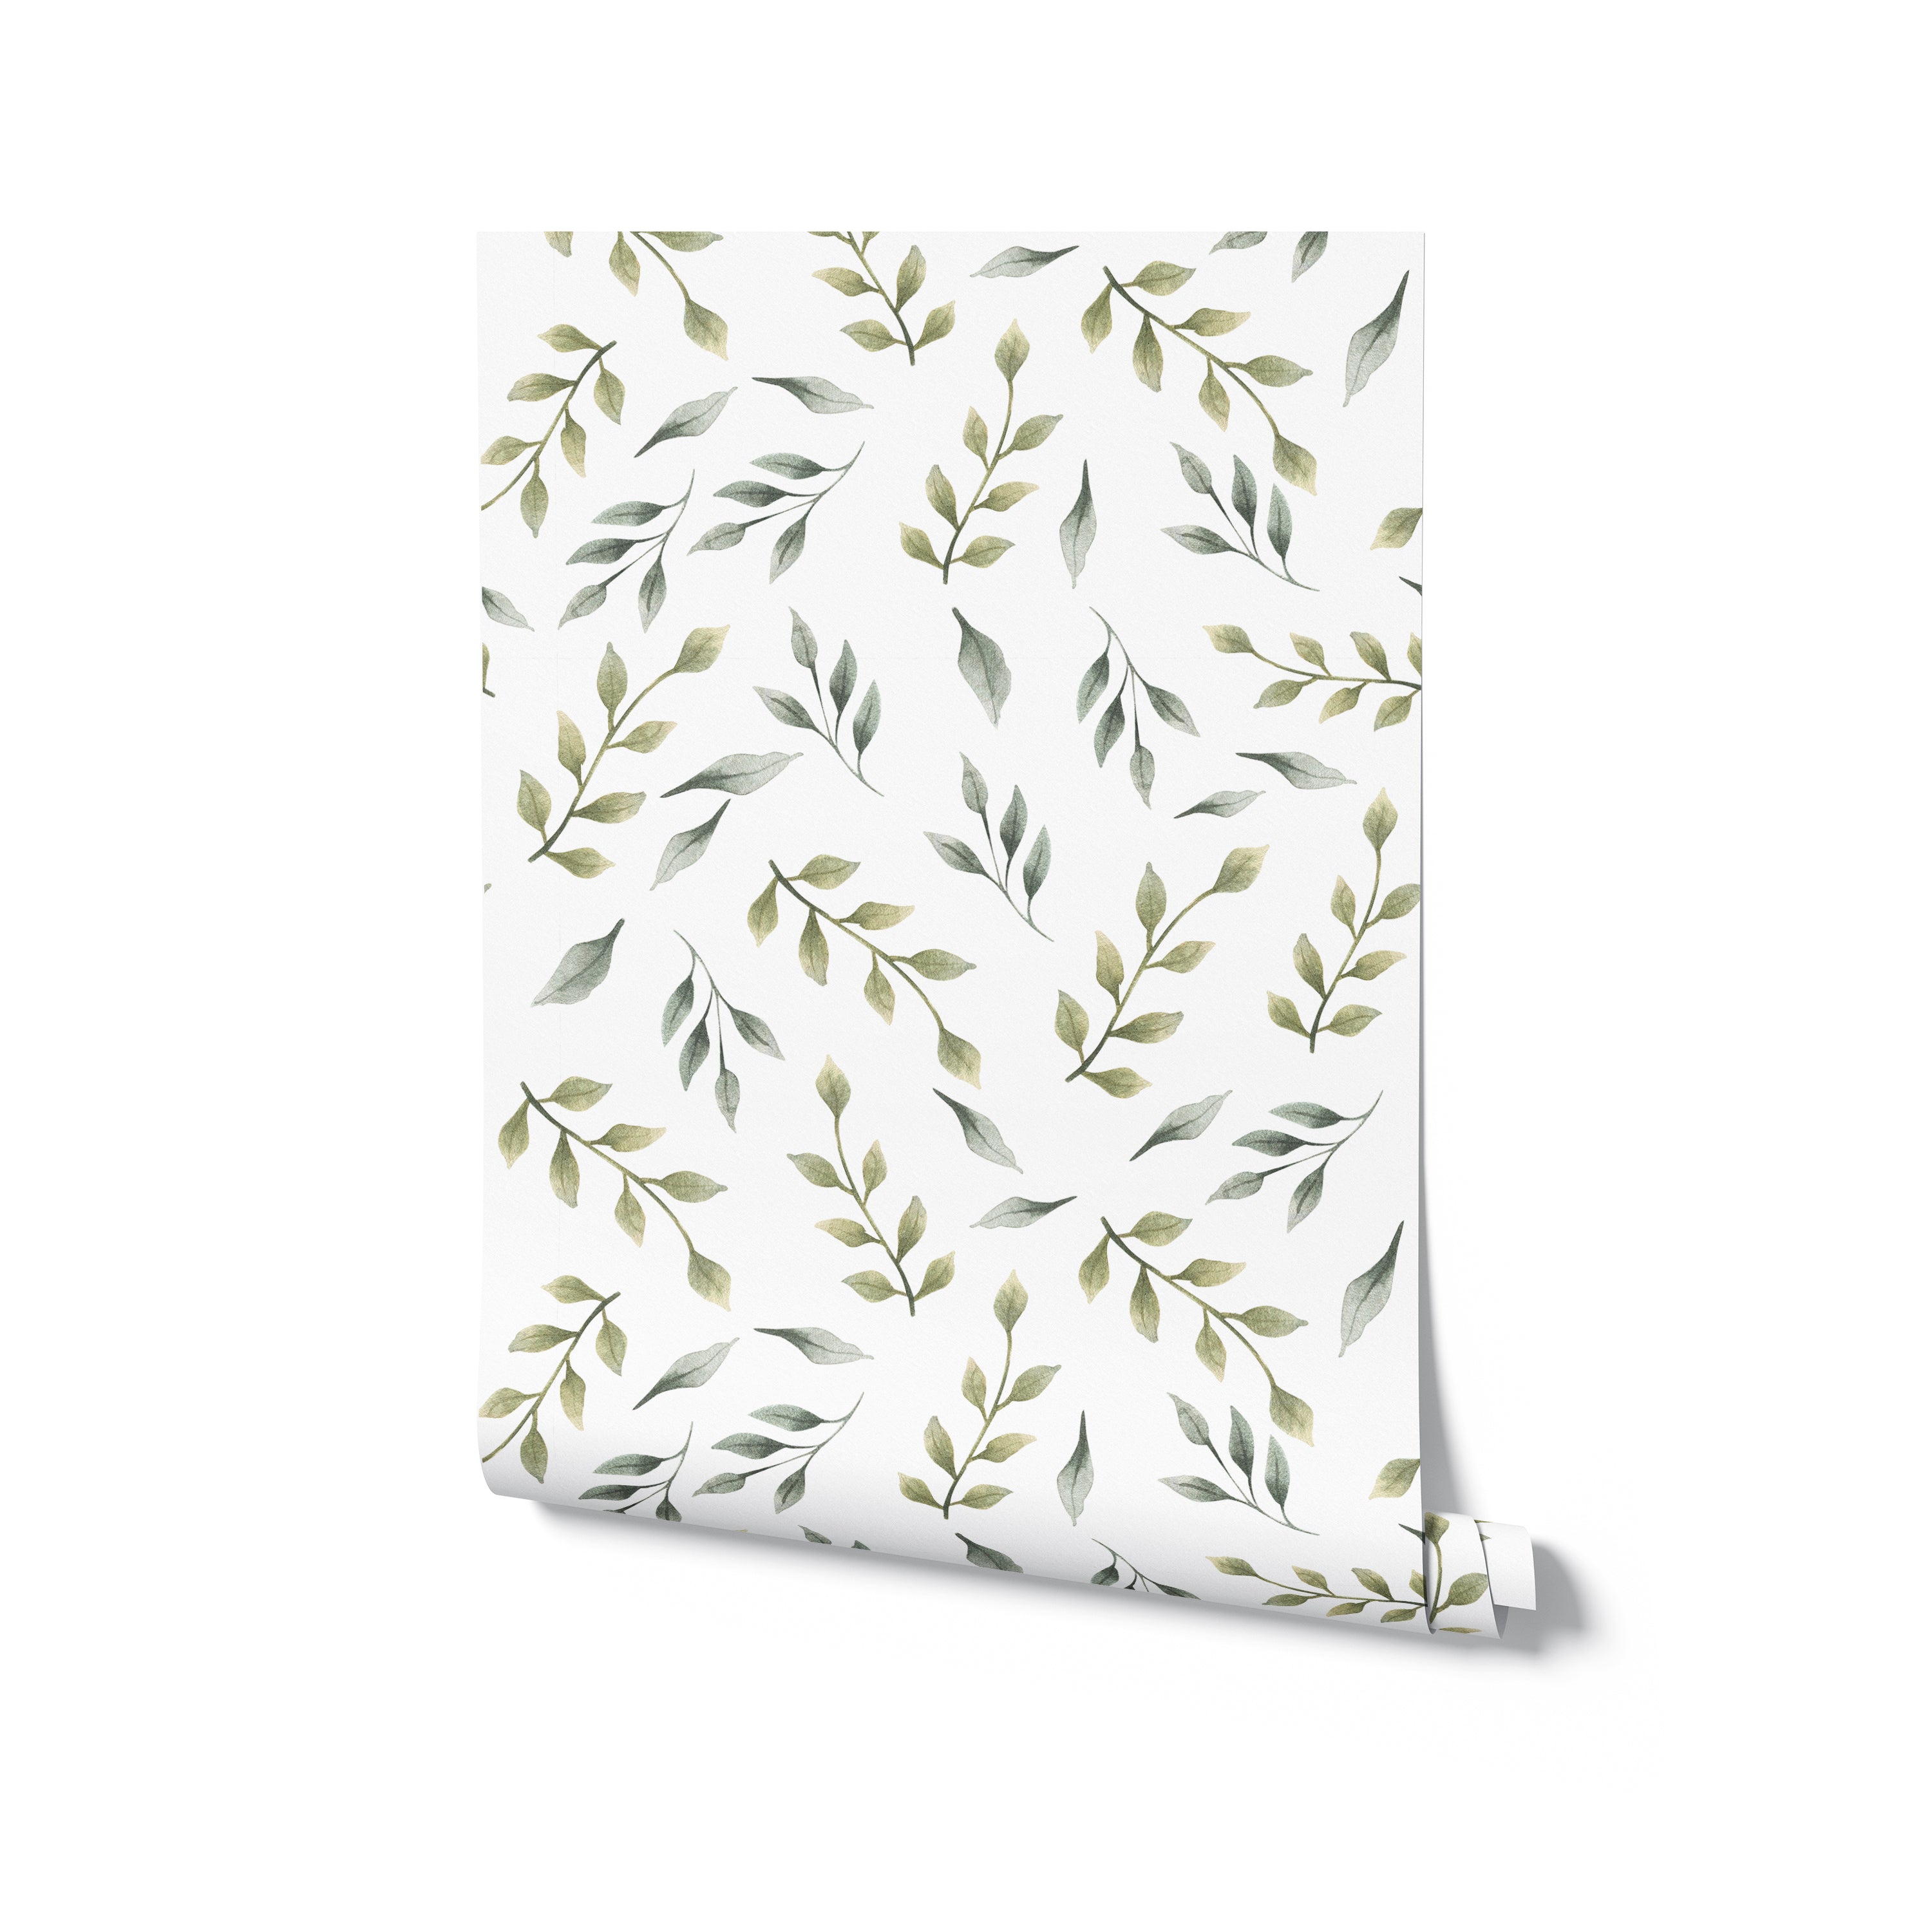 A roll of Nursery Green Floral Wallpaper, unrolling to reveal a charming pattern of hand-painted green foliage. The watercolor leaves in varying shades of green convey a sense of freshness and tranquility, perfect for creating a soothing atmosphere in a nursery or play area.